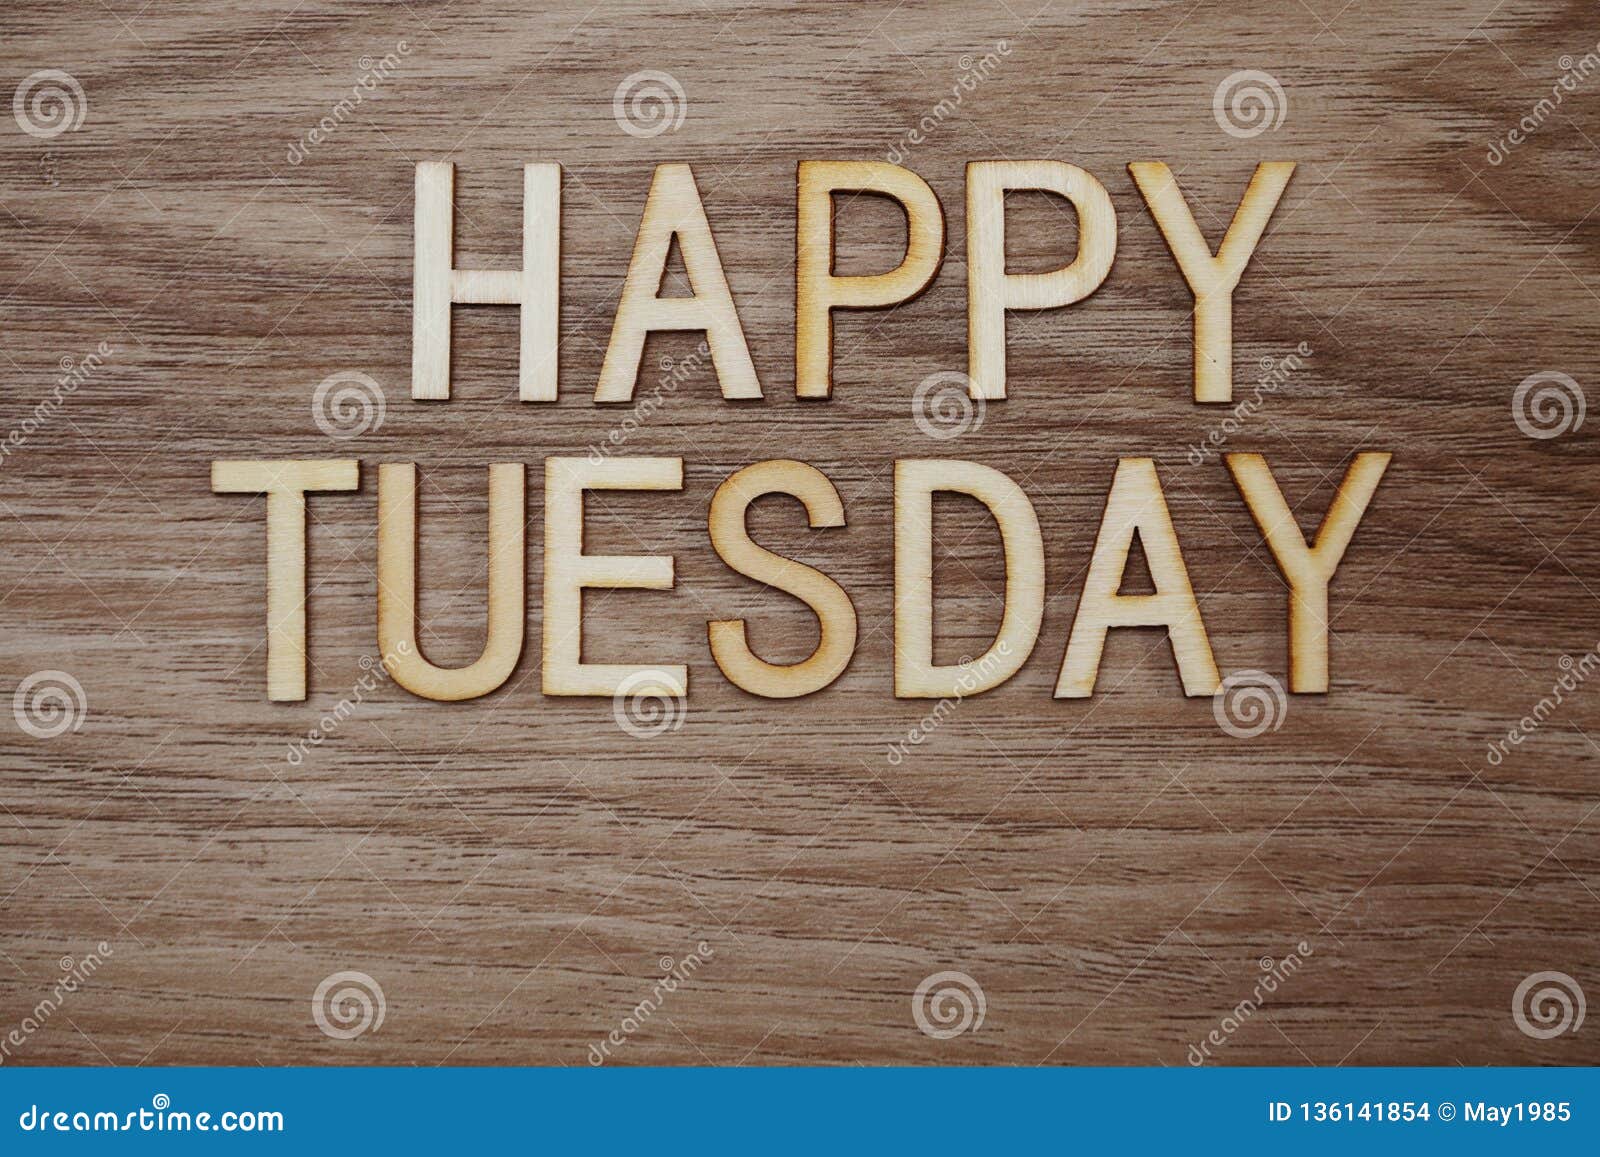 Happy Tuesday Text Message on Wooden Background Stock Photo ...